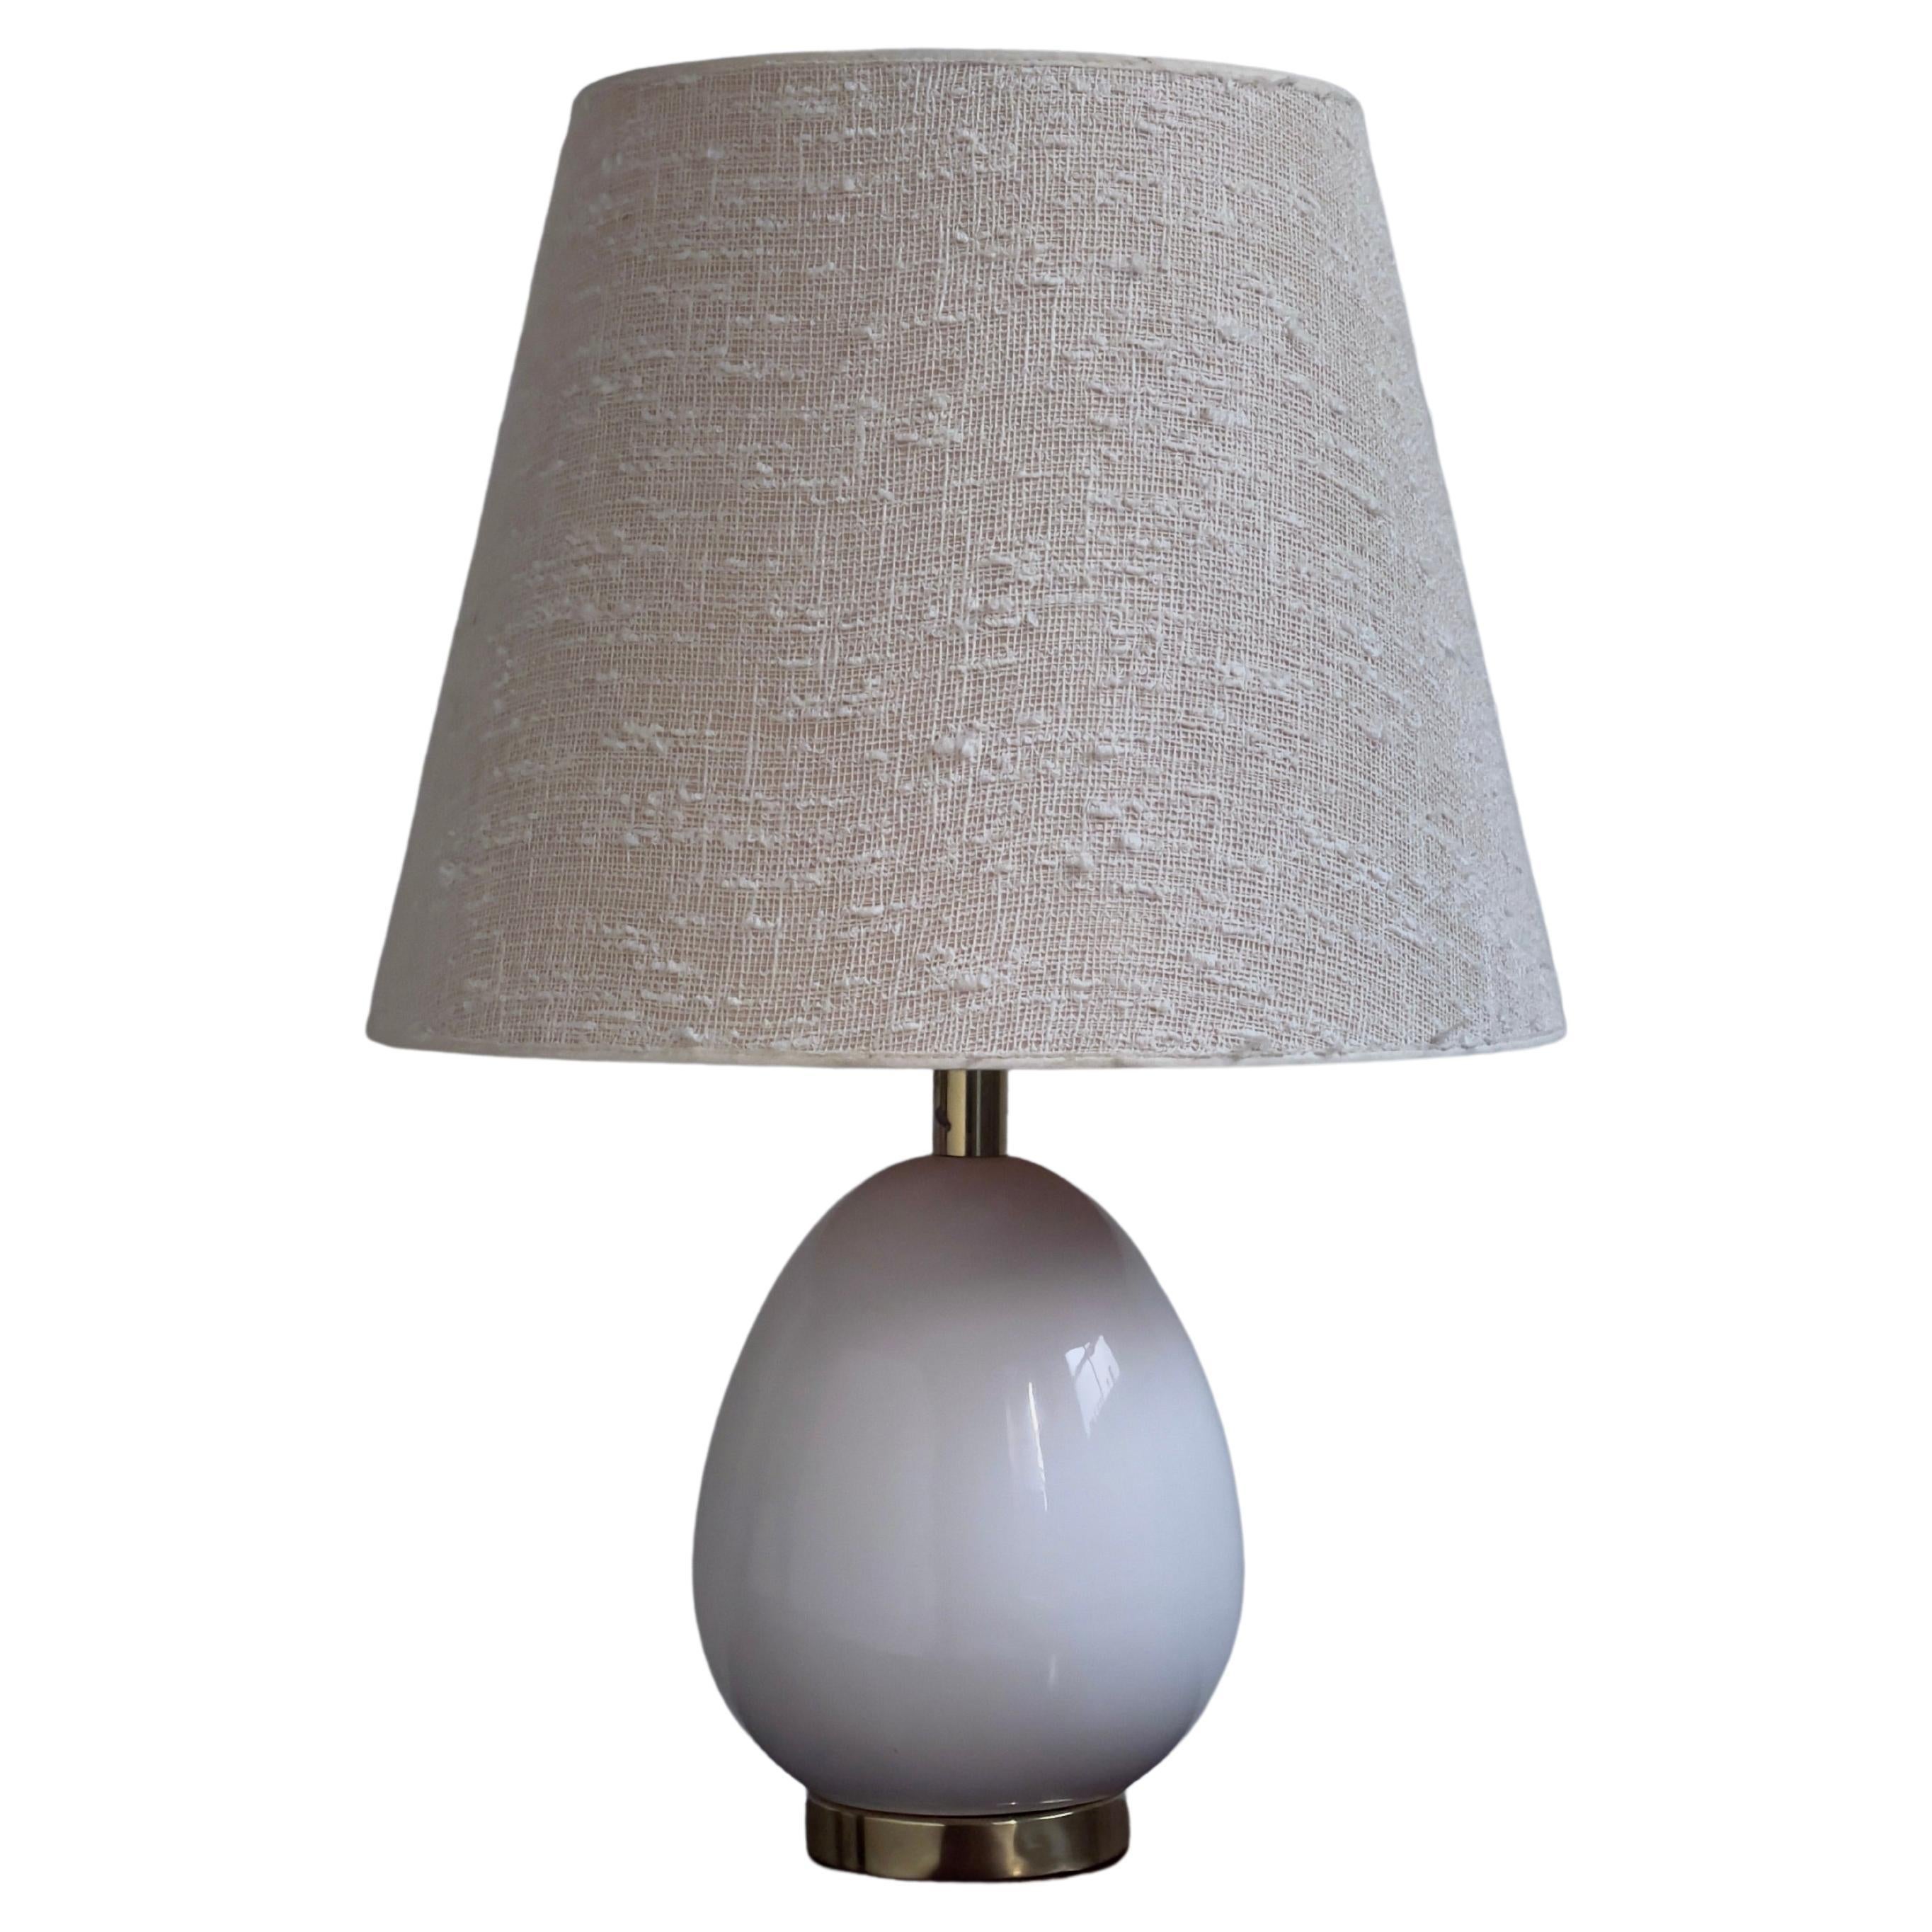 1960s Bergboms Sweden Table Lamp in White Glazed Ceramic and Brass Base For Sale